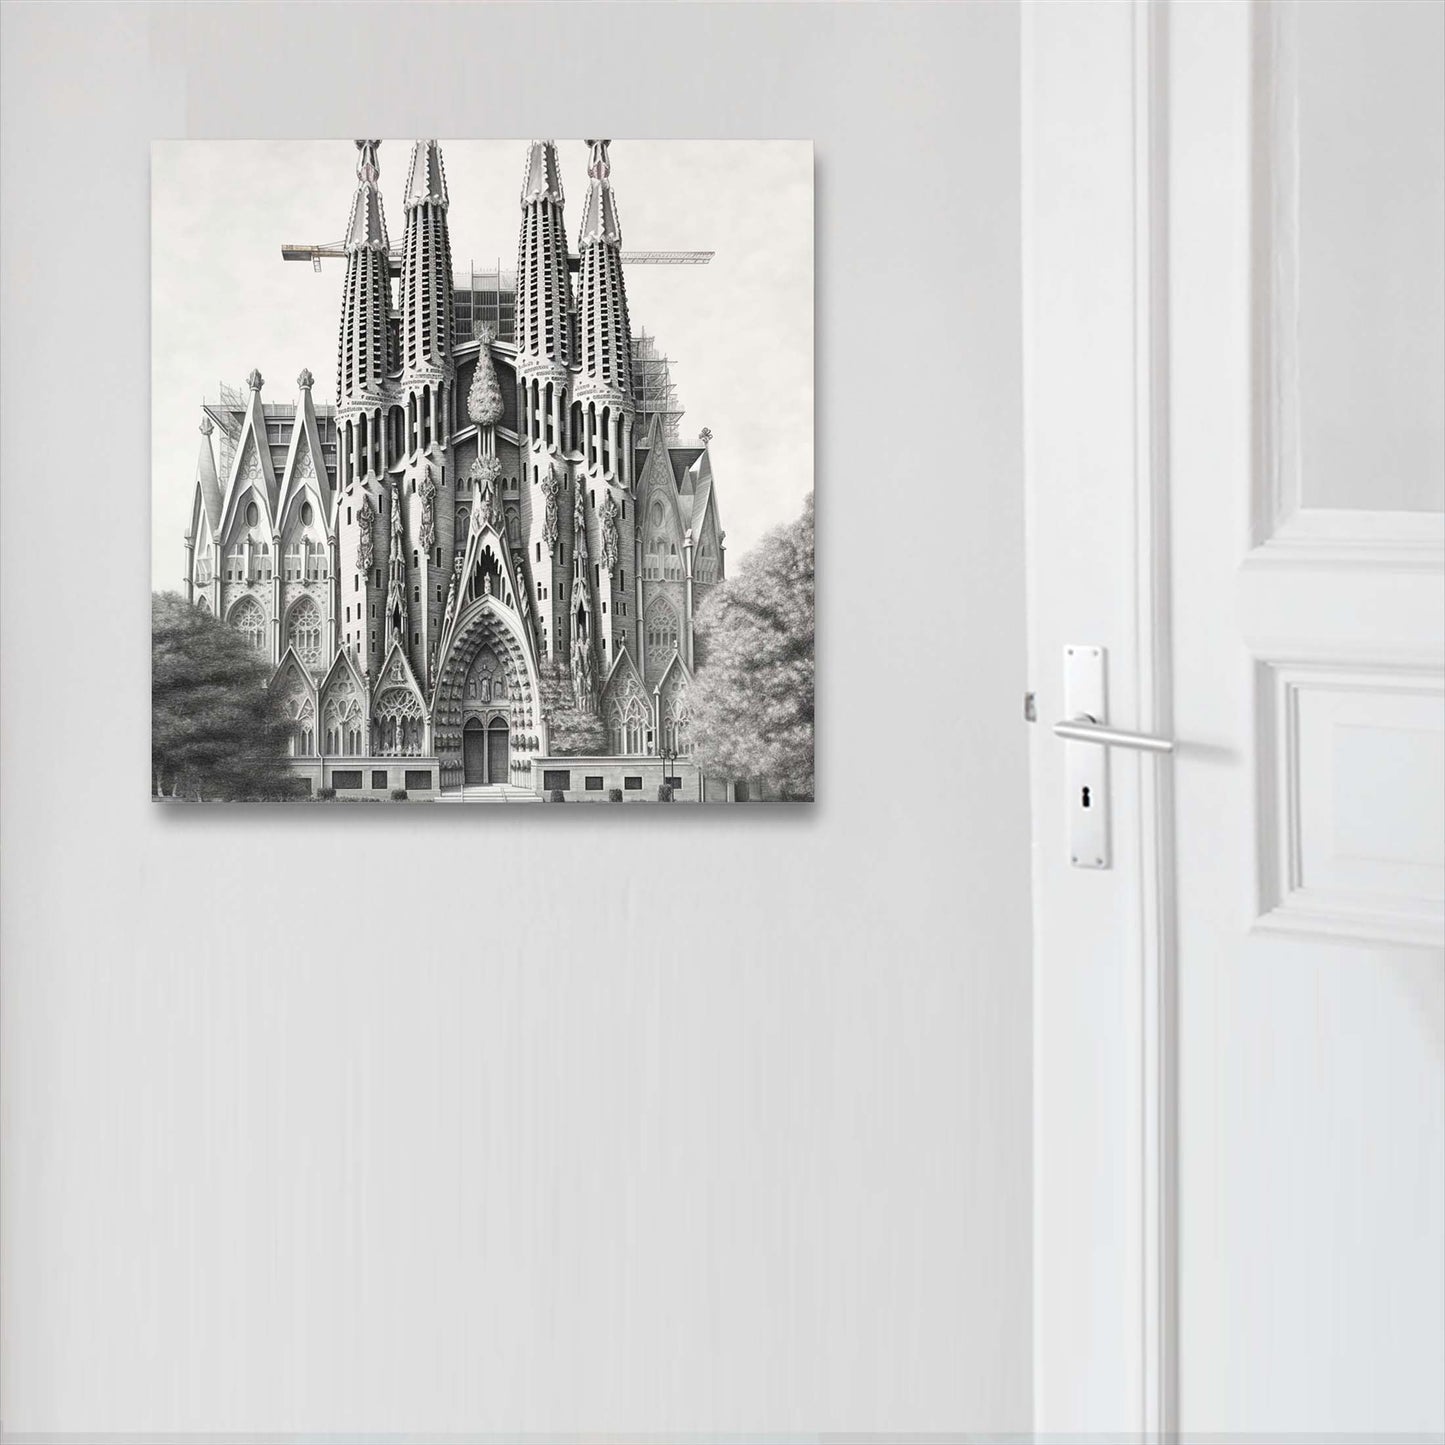 Barcelona Sagrada Familia - mural in the style of a drawing